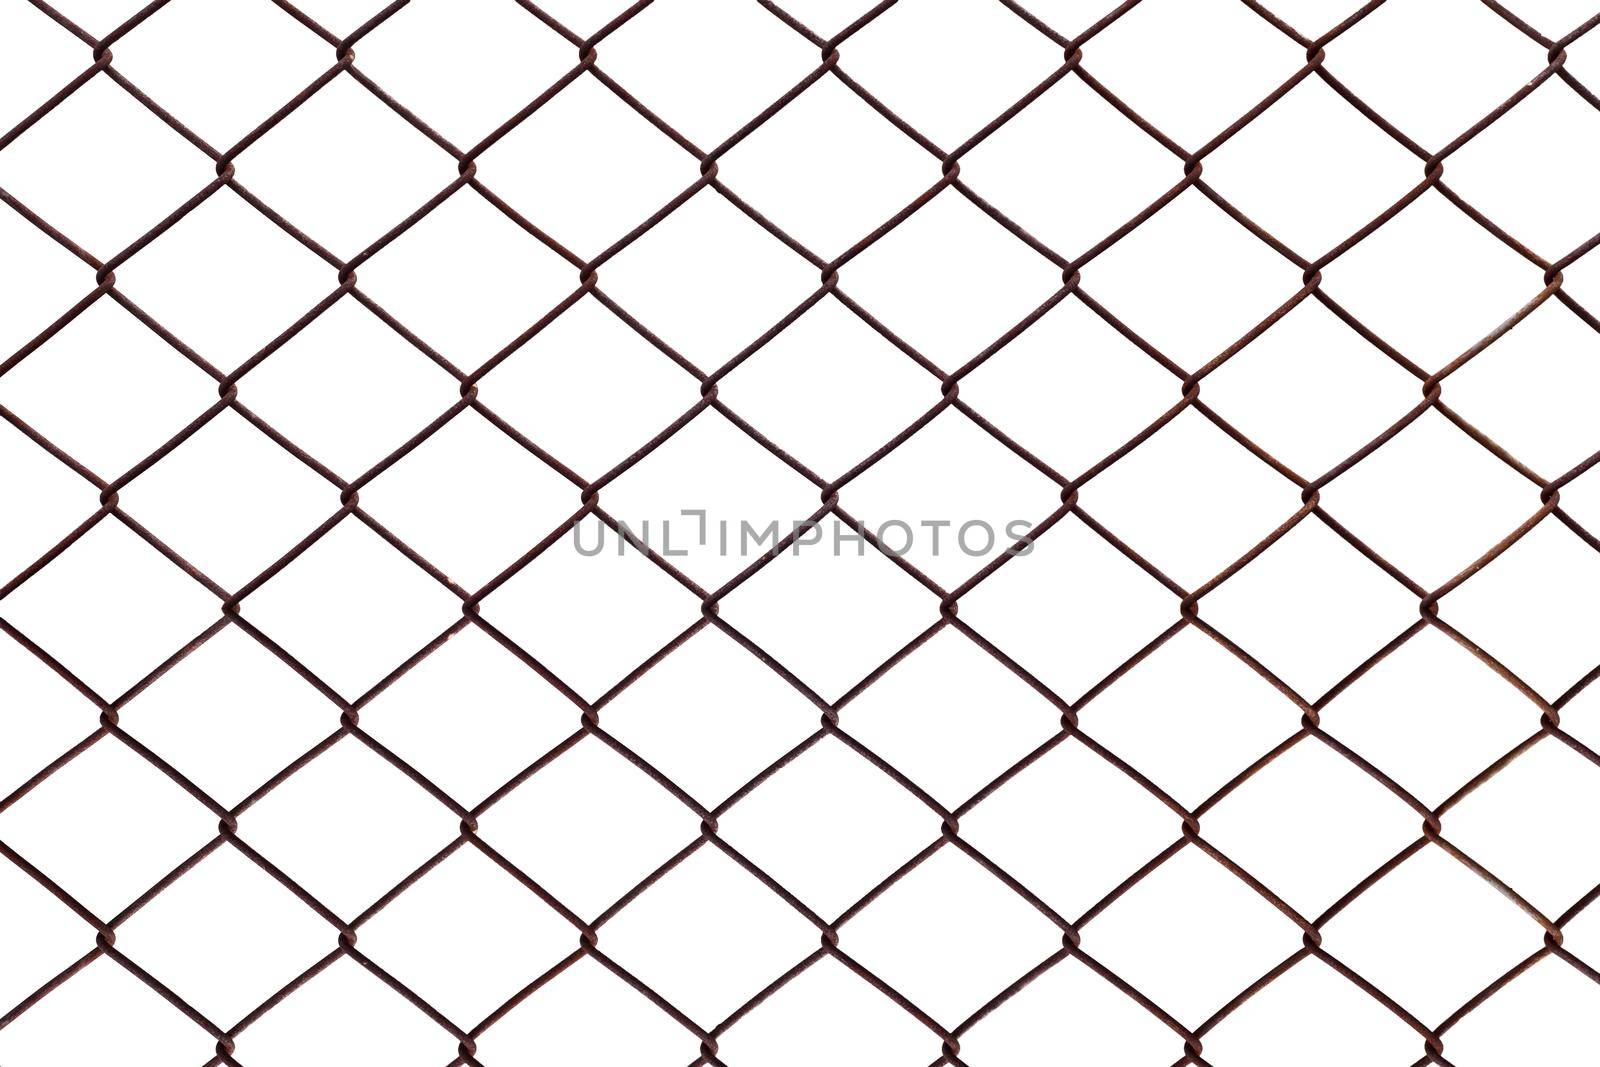 Steel mesh rusty isolated on white background.